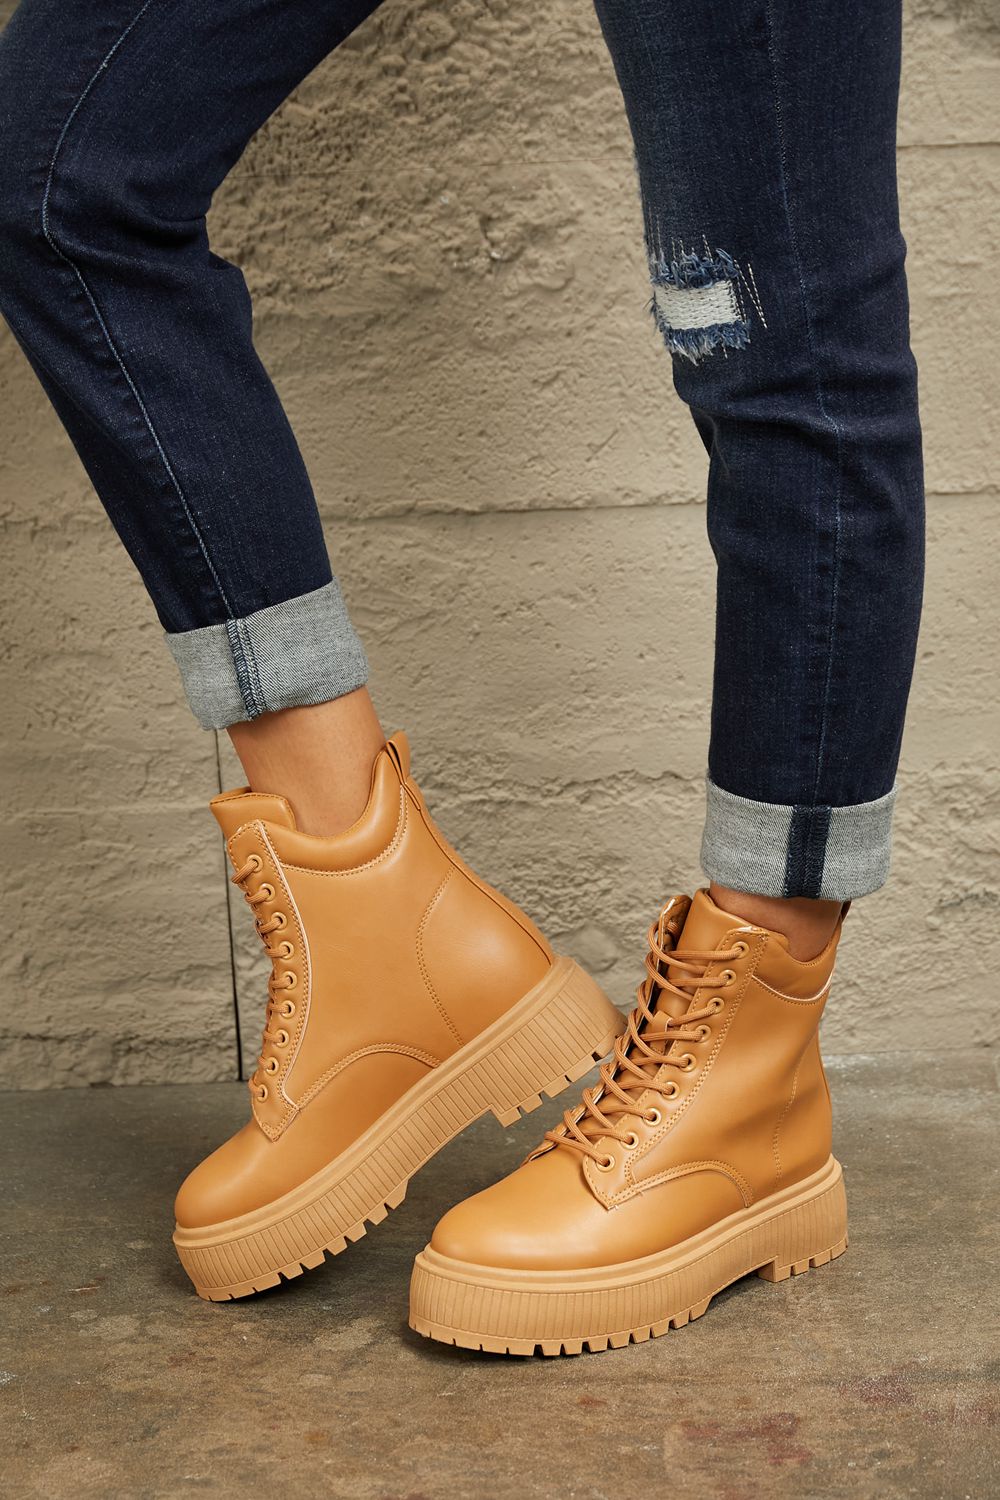 East Lion Corp Platform Combat Chunky Thick Sole Caramel Tan Lace Up Bootie Boots